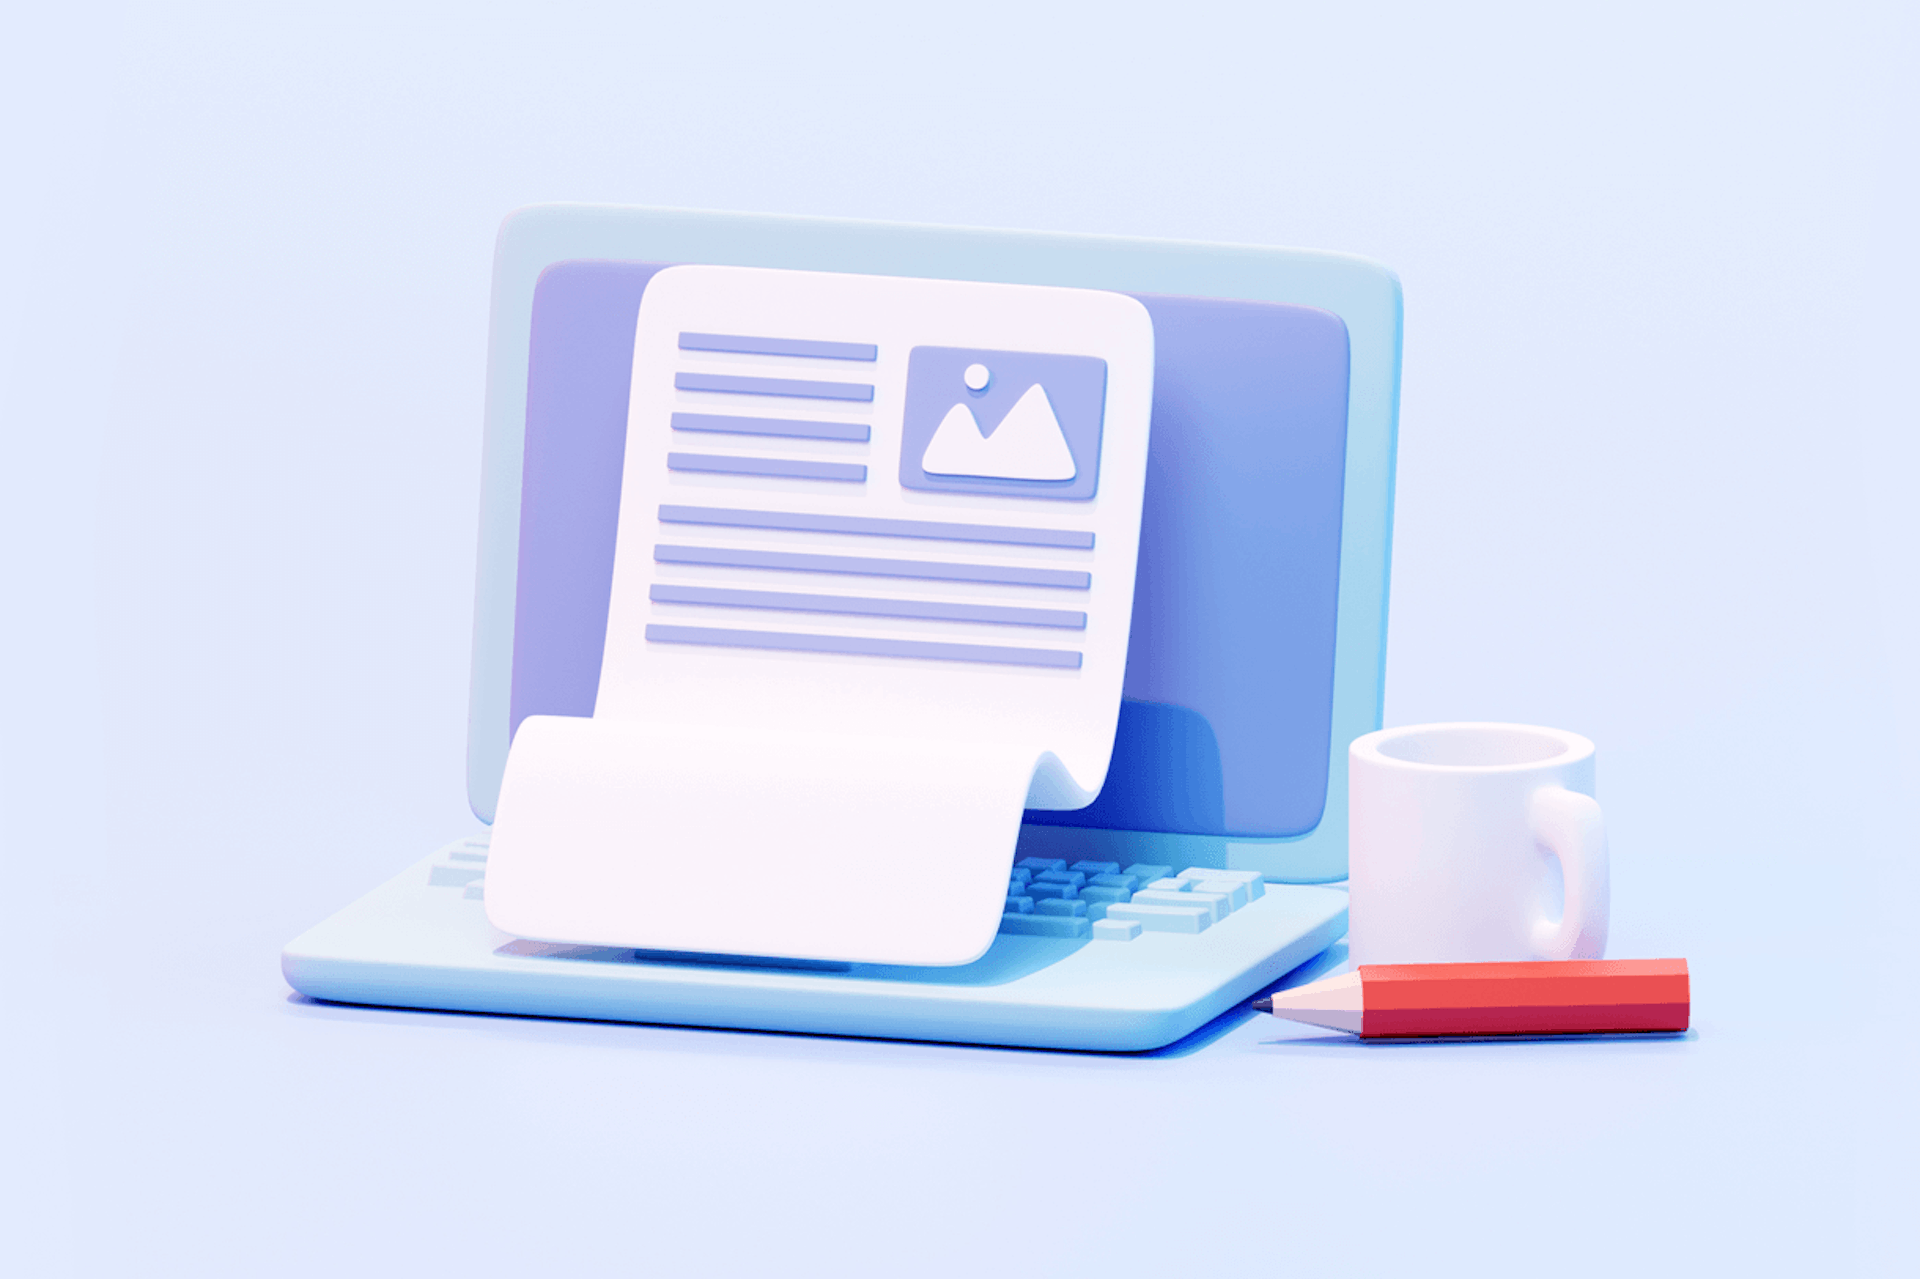 3D Illustration of a laptop with a blogger outreach campaign brief